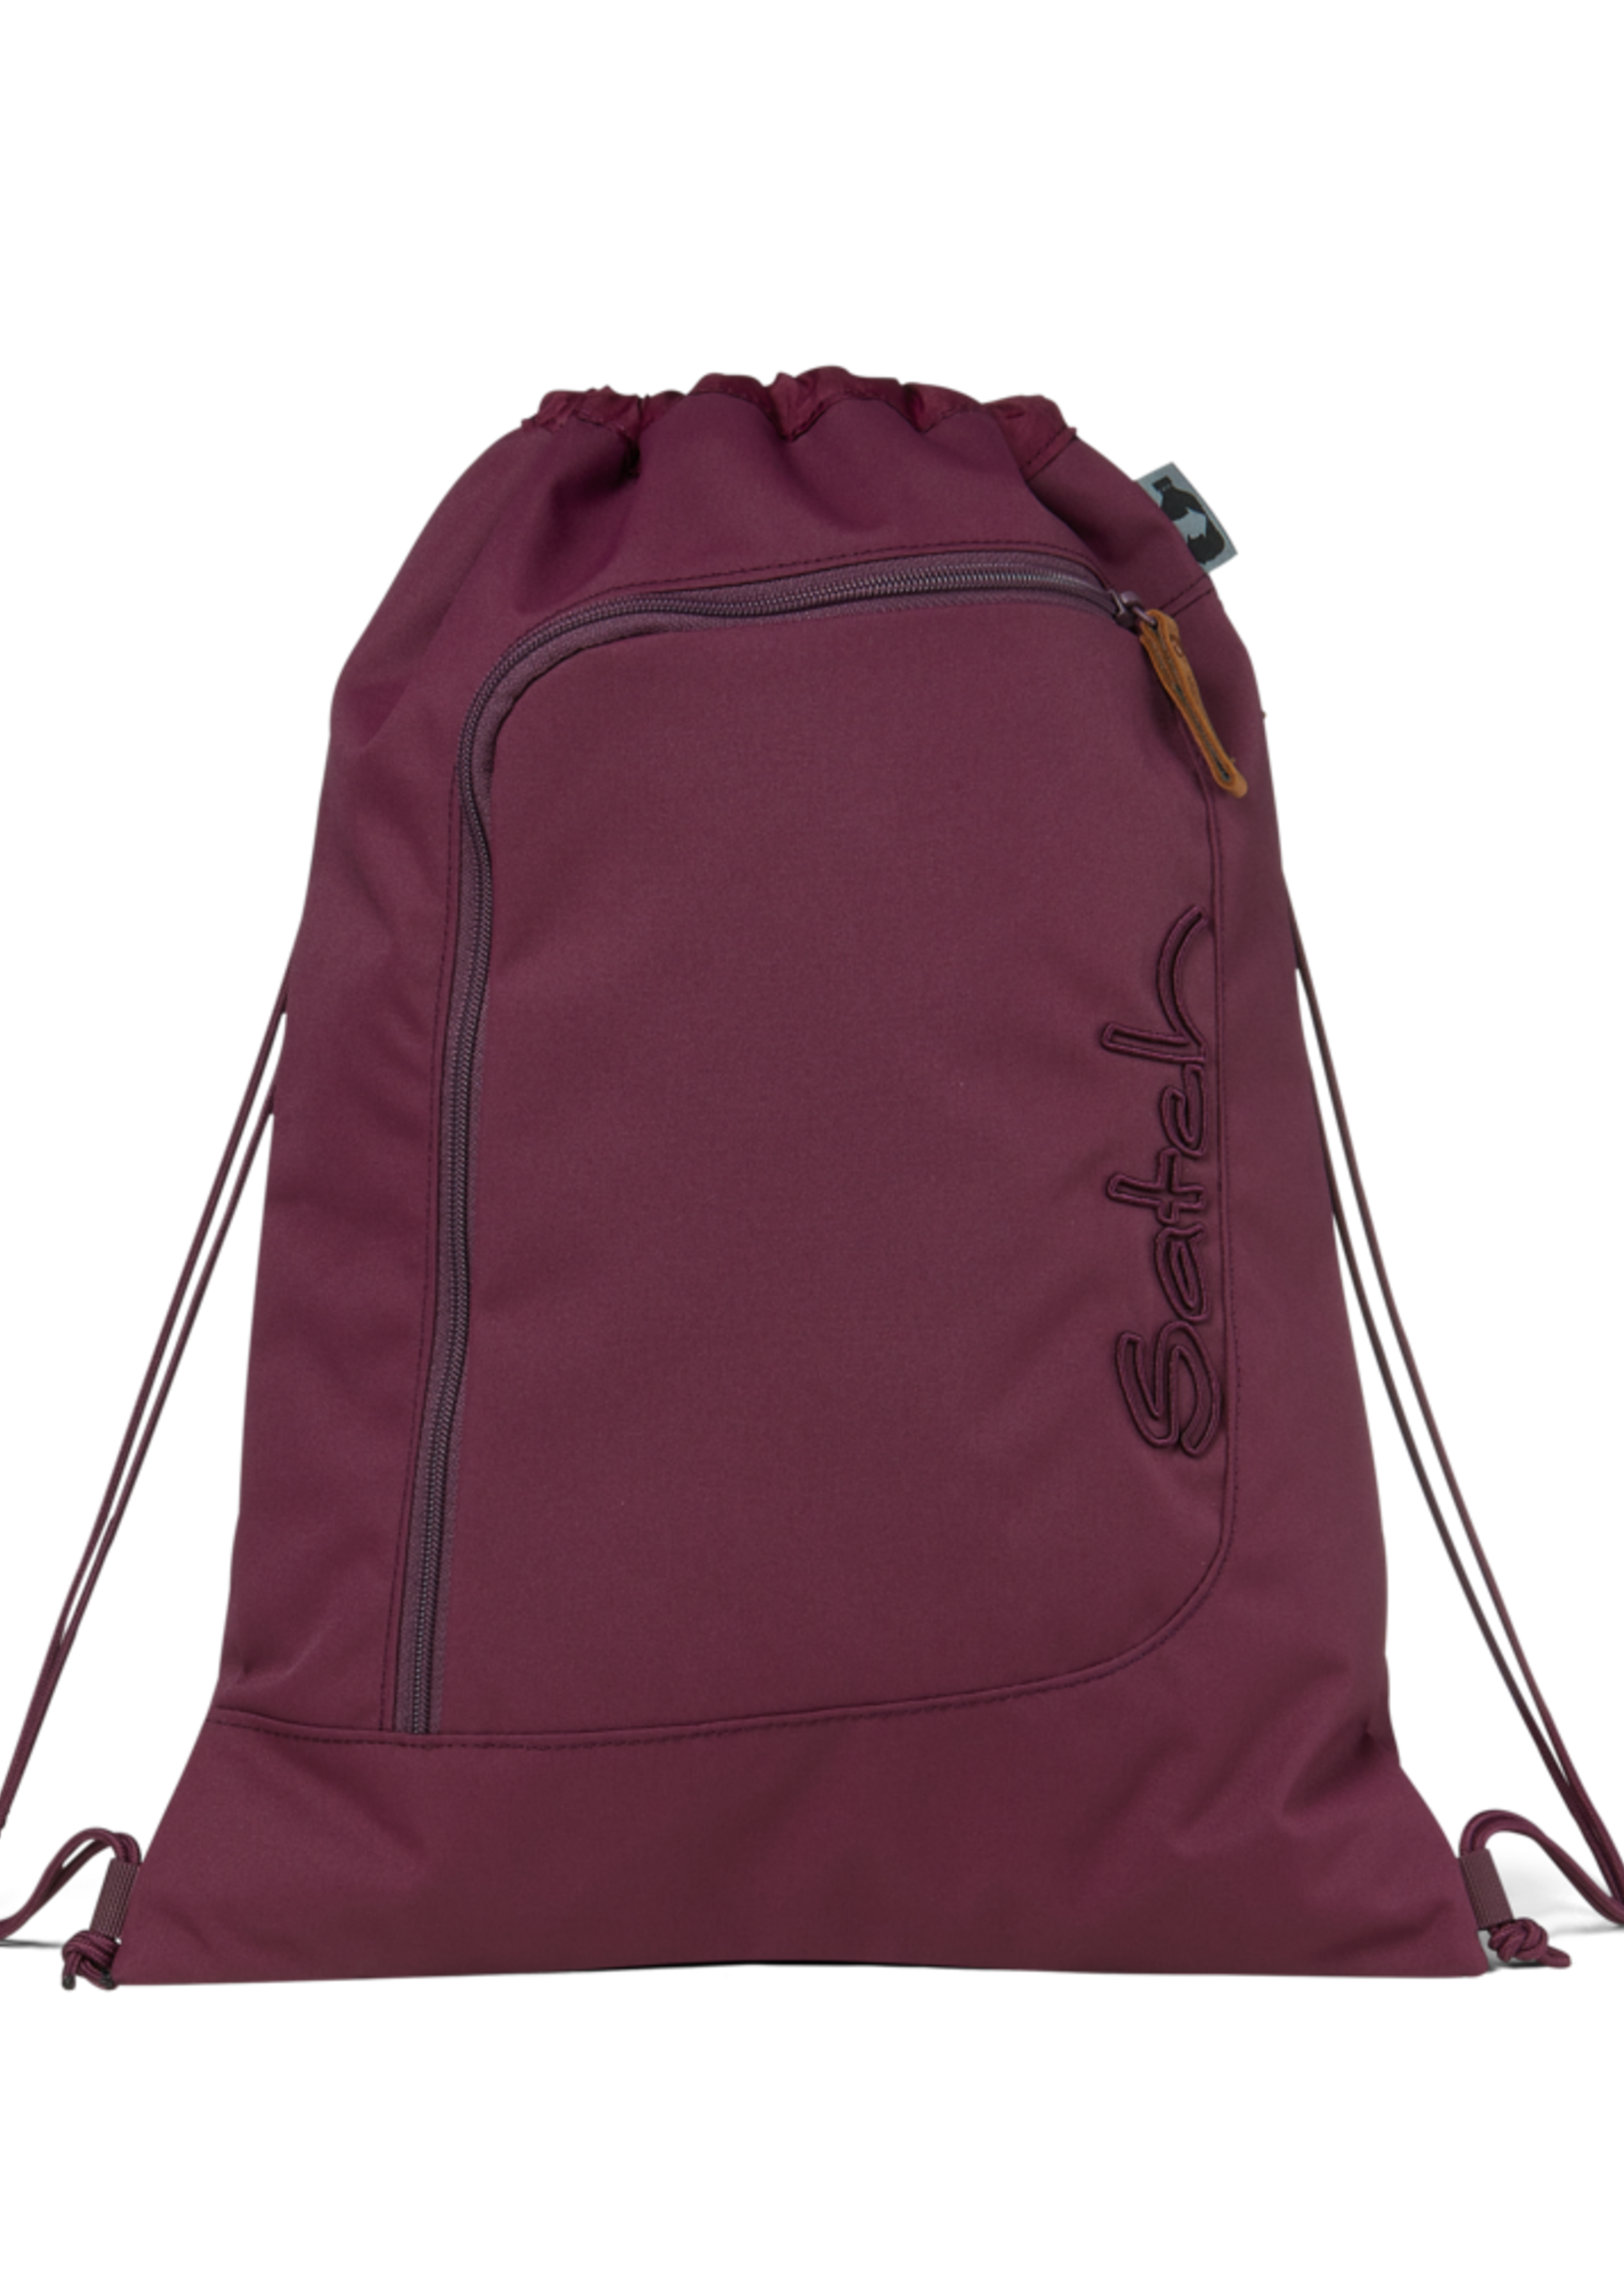 SATCH satch Gym Bag Nordic Berry